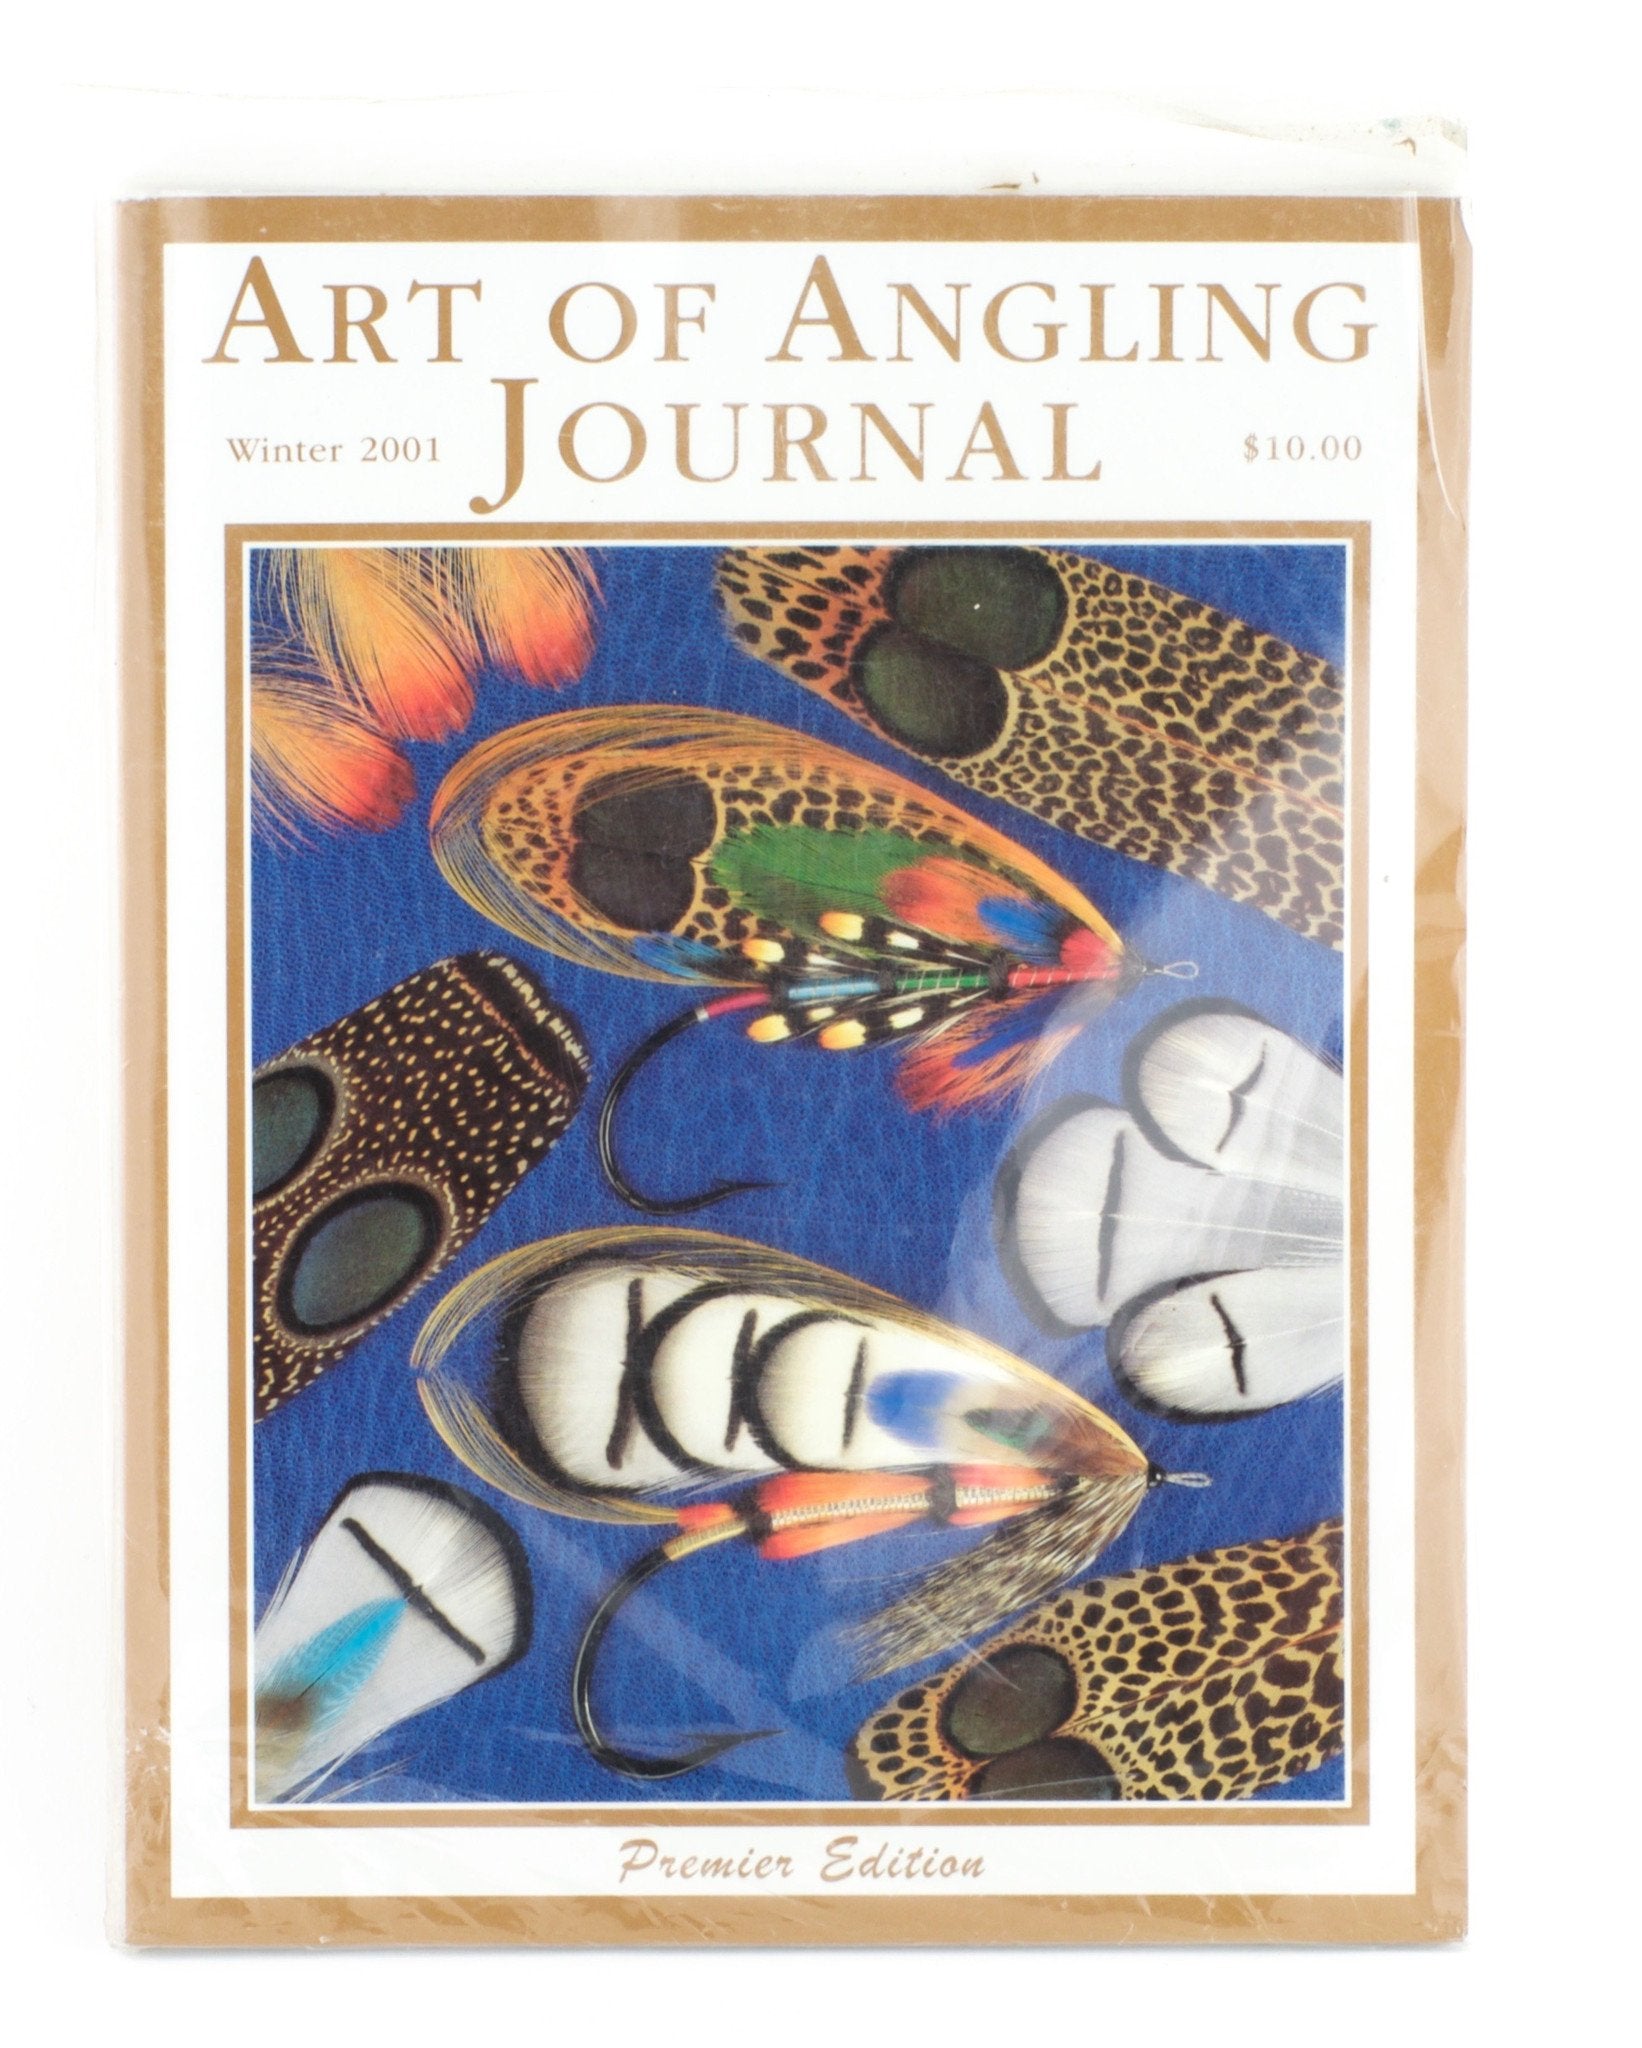 Art of Angling Journal - Winter 2001 Premier Edition